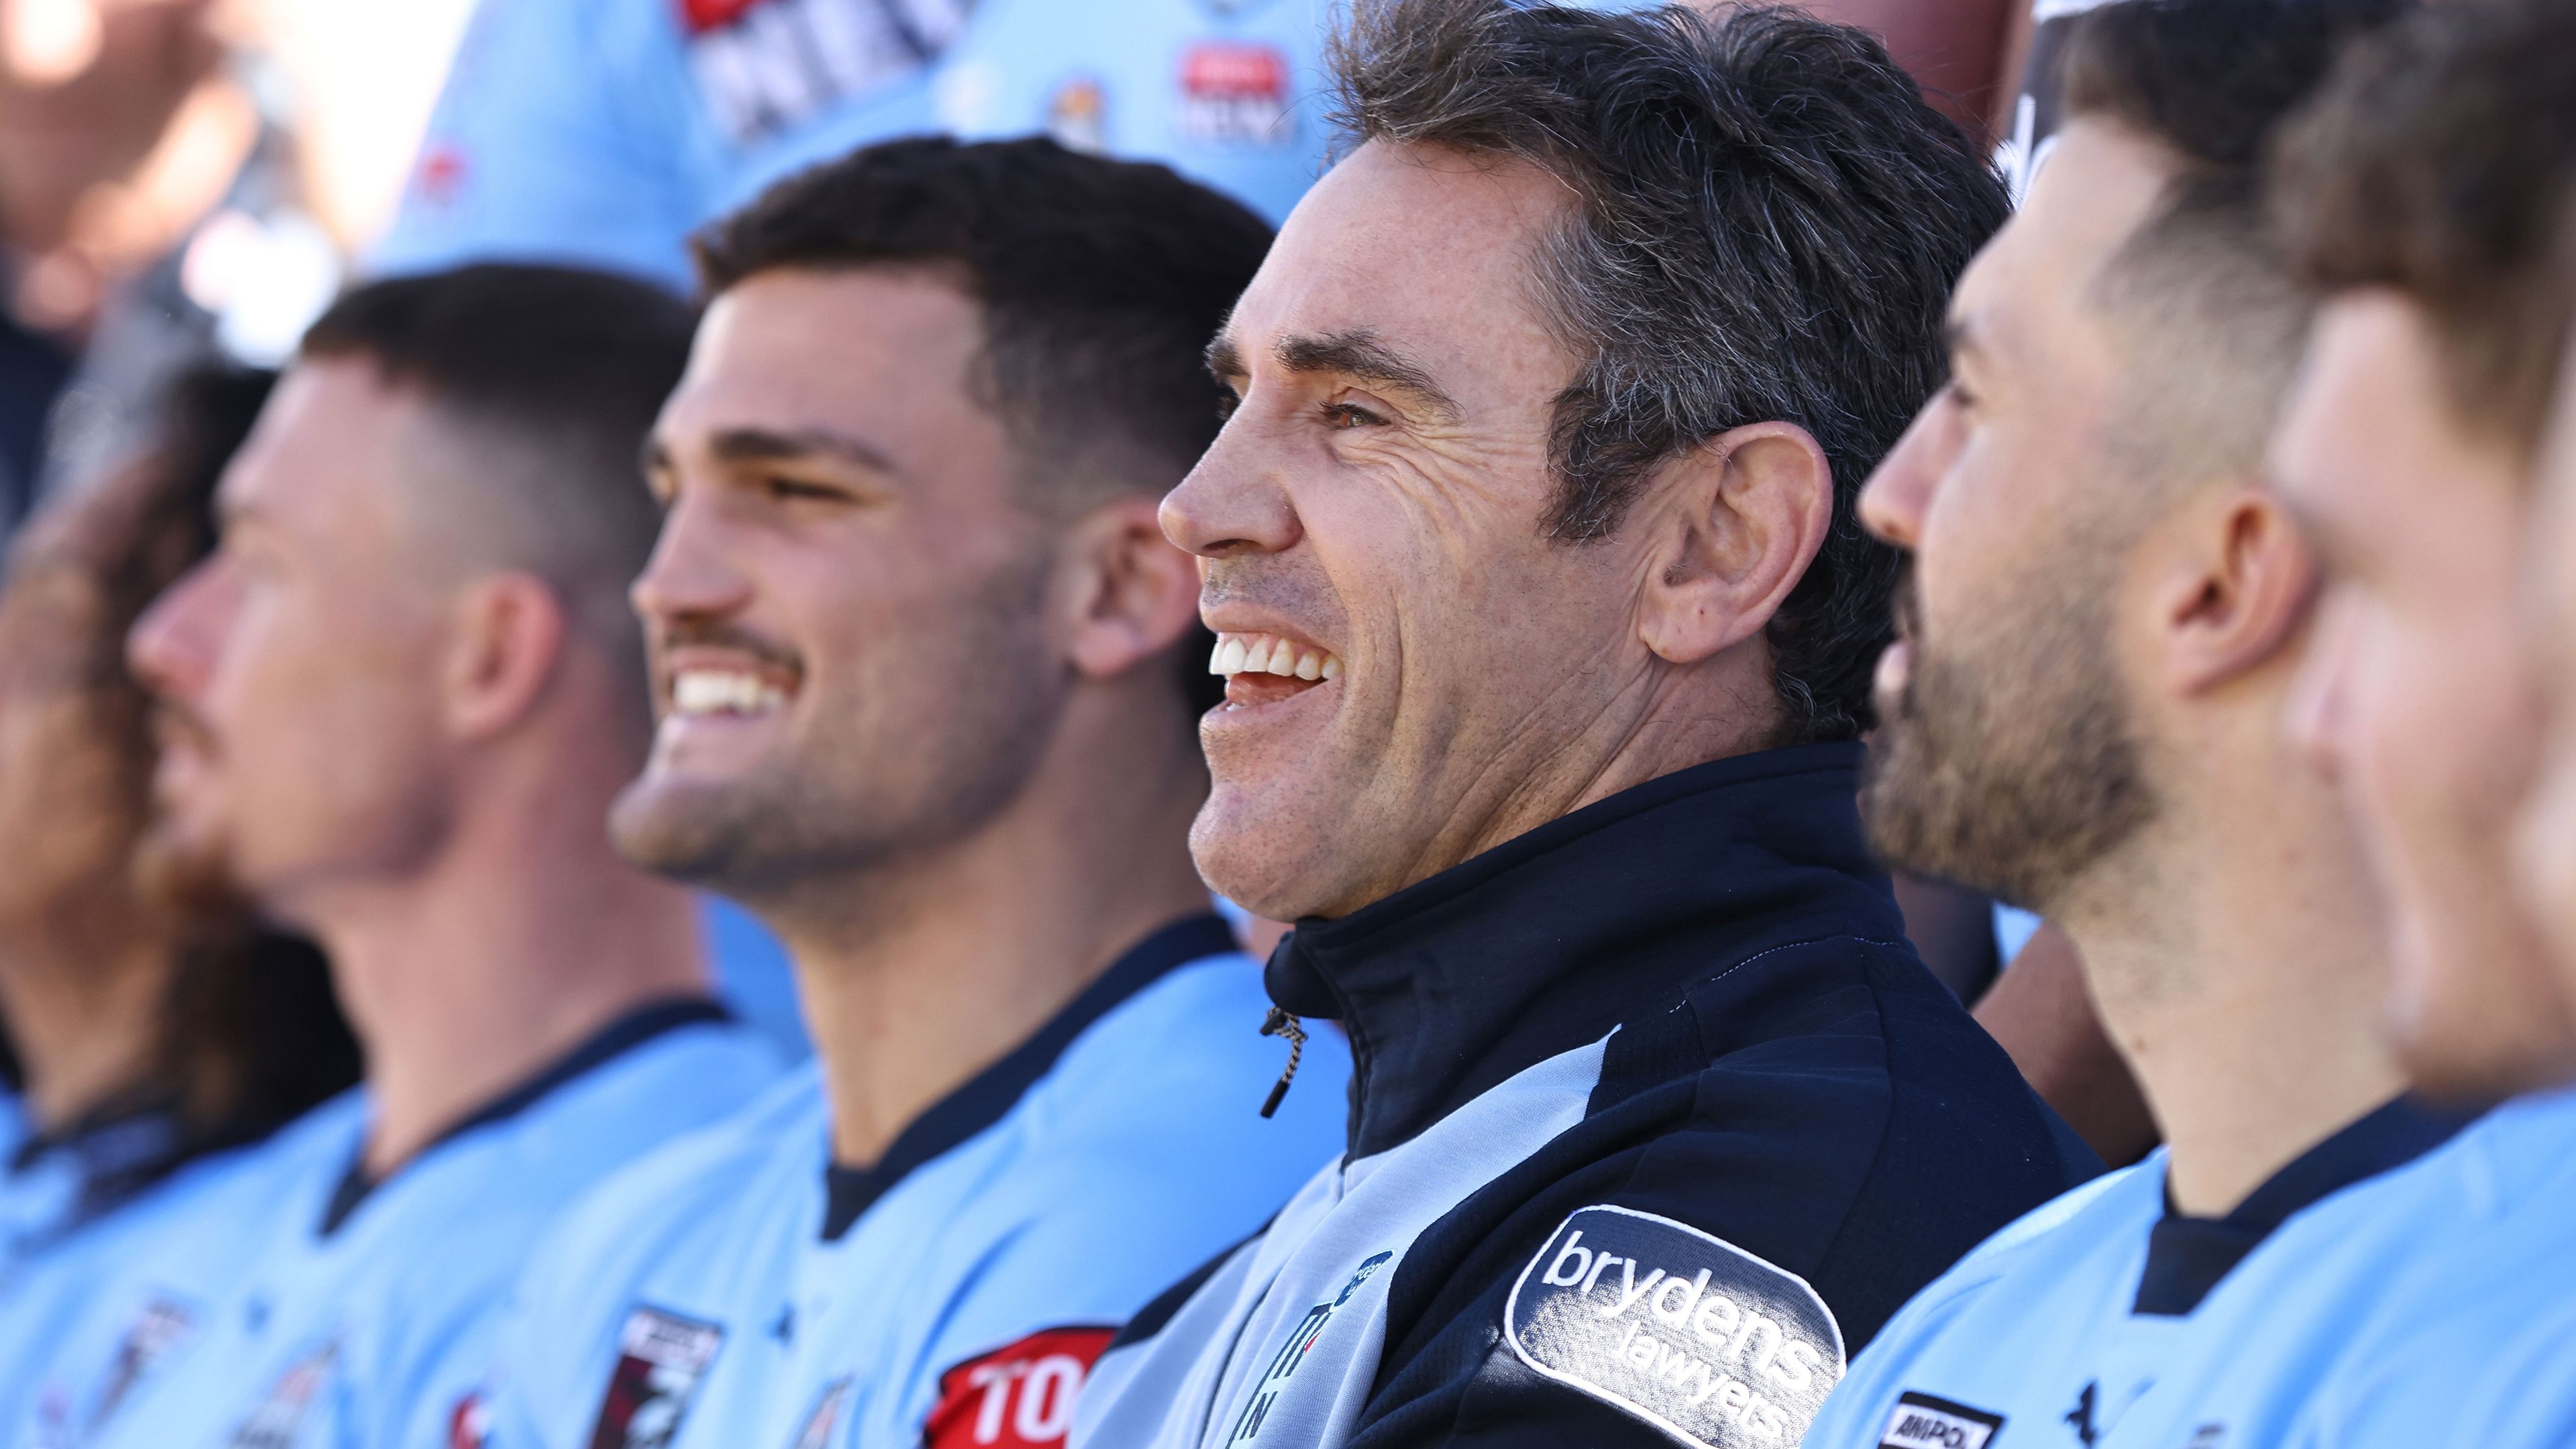 NSW Blues coach Brad Fittler's proposal to end State of Origin eligibility debacle